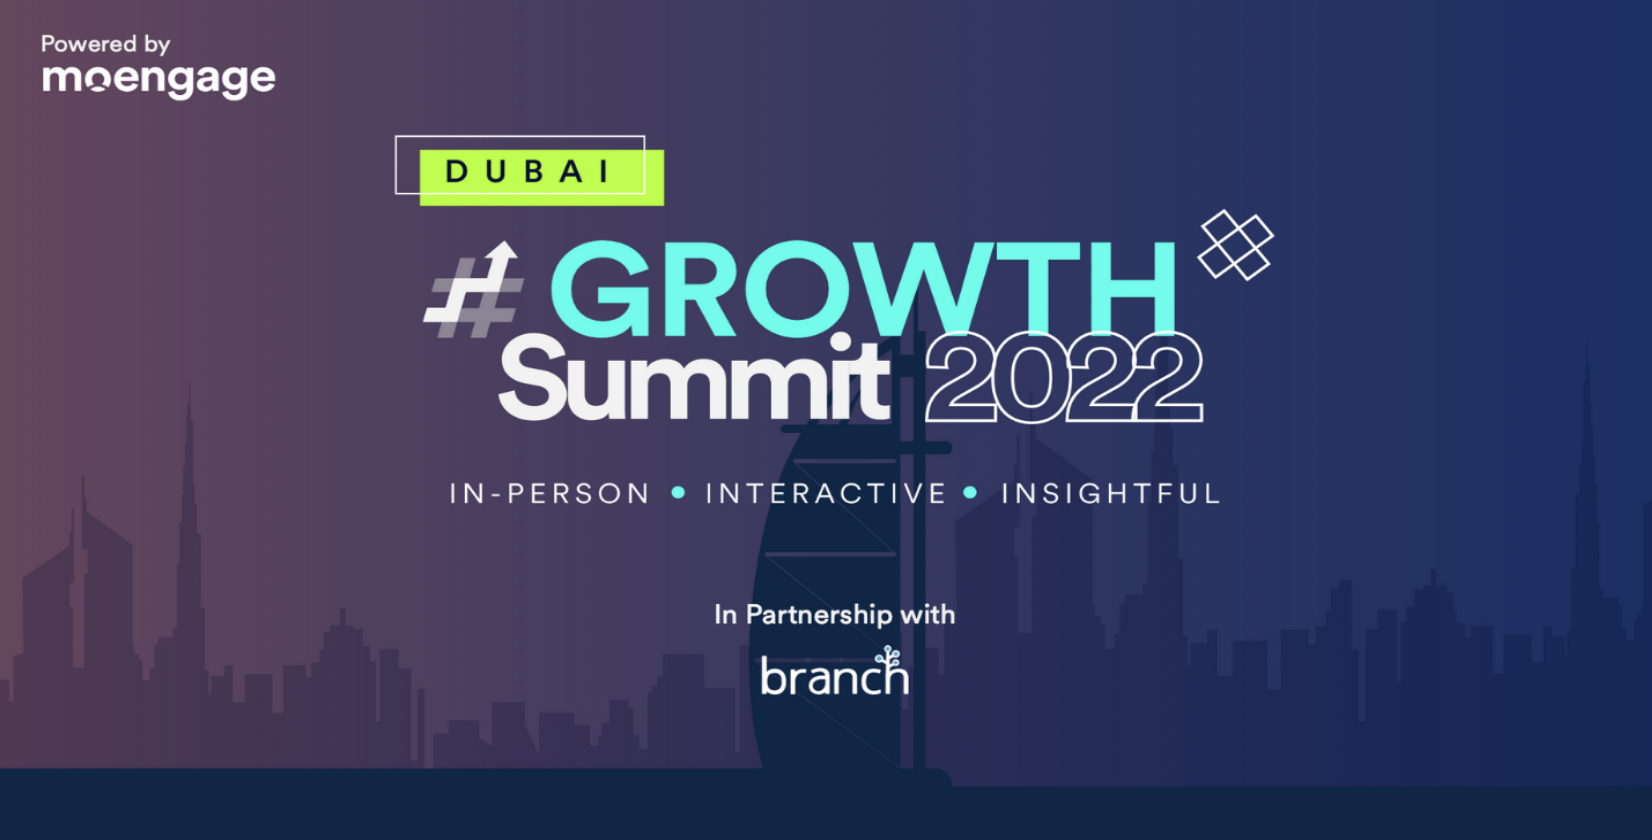 #GROWTH Summit Dubai: MoEngage Hosts 250+ Brands and Marketers